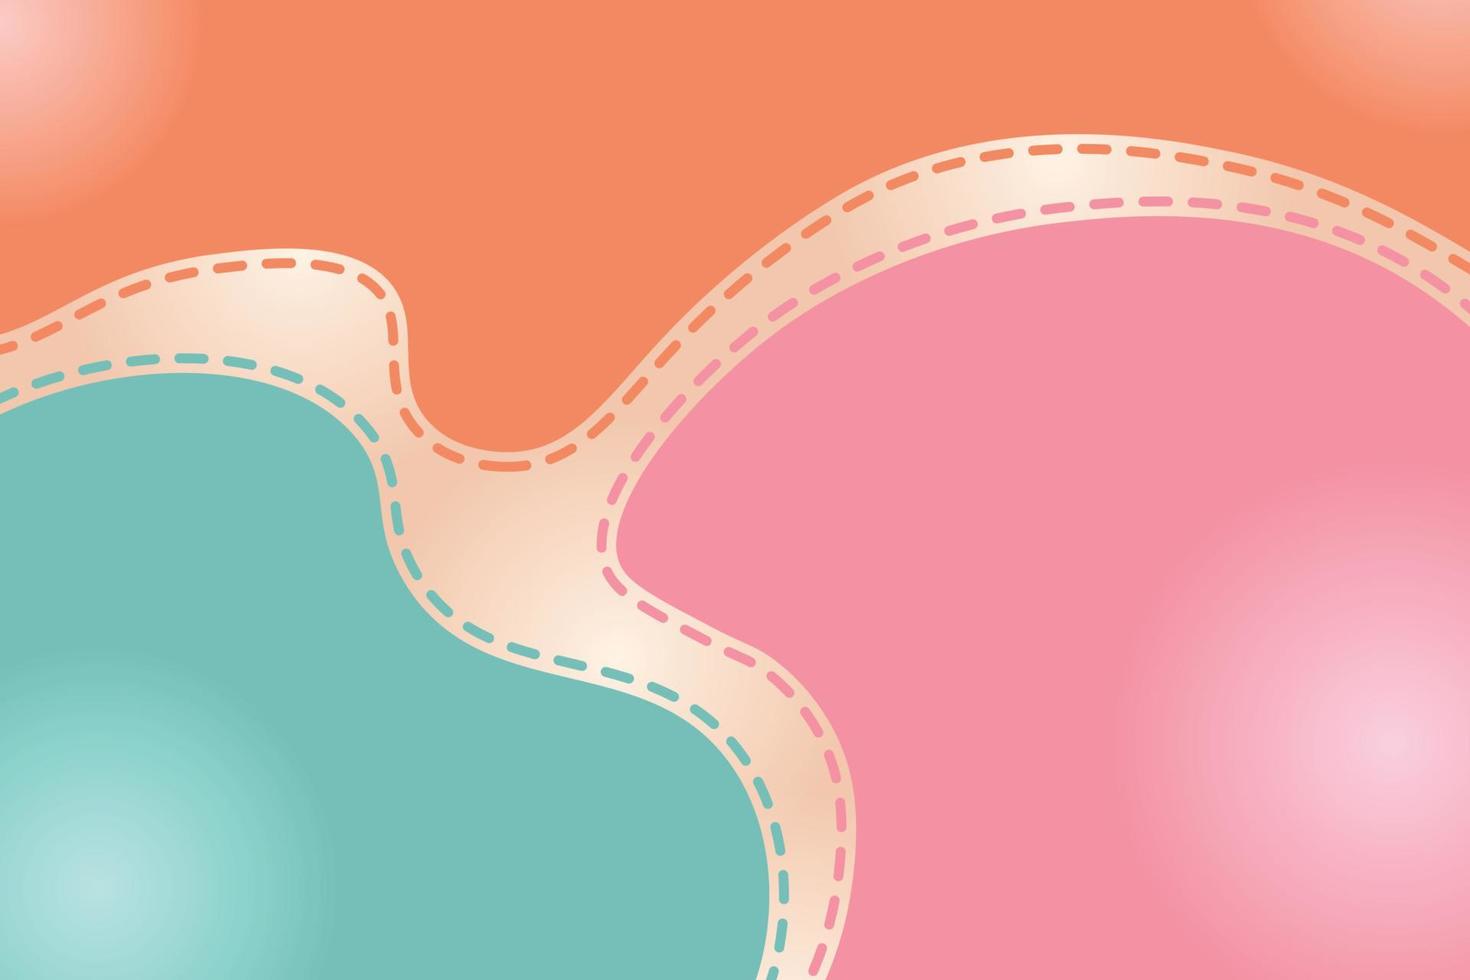 Minimalistic abstract background. Colorful liquid with free flowing shapes, green, pink and pastel orange. vector